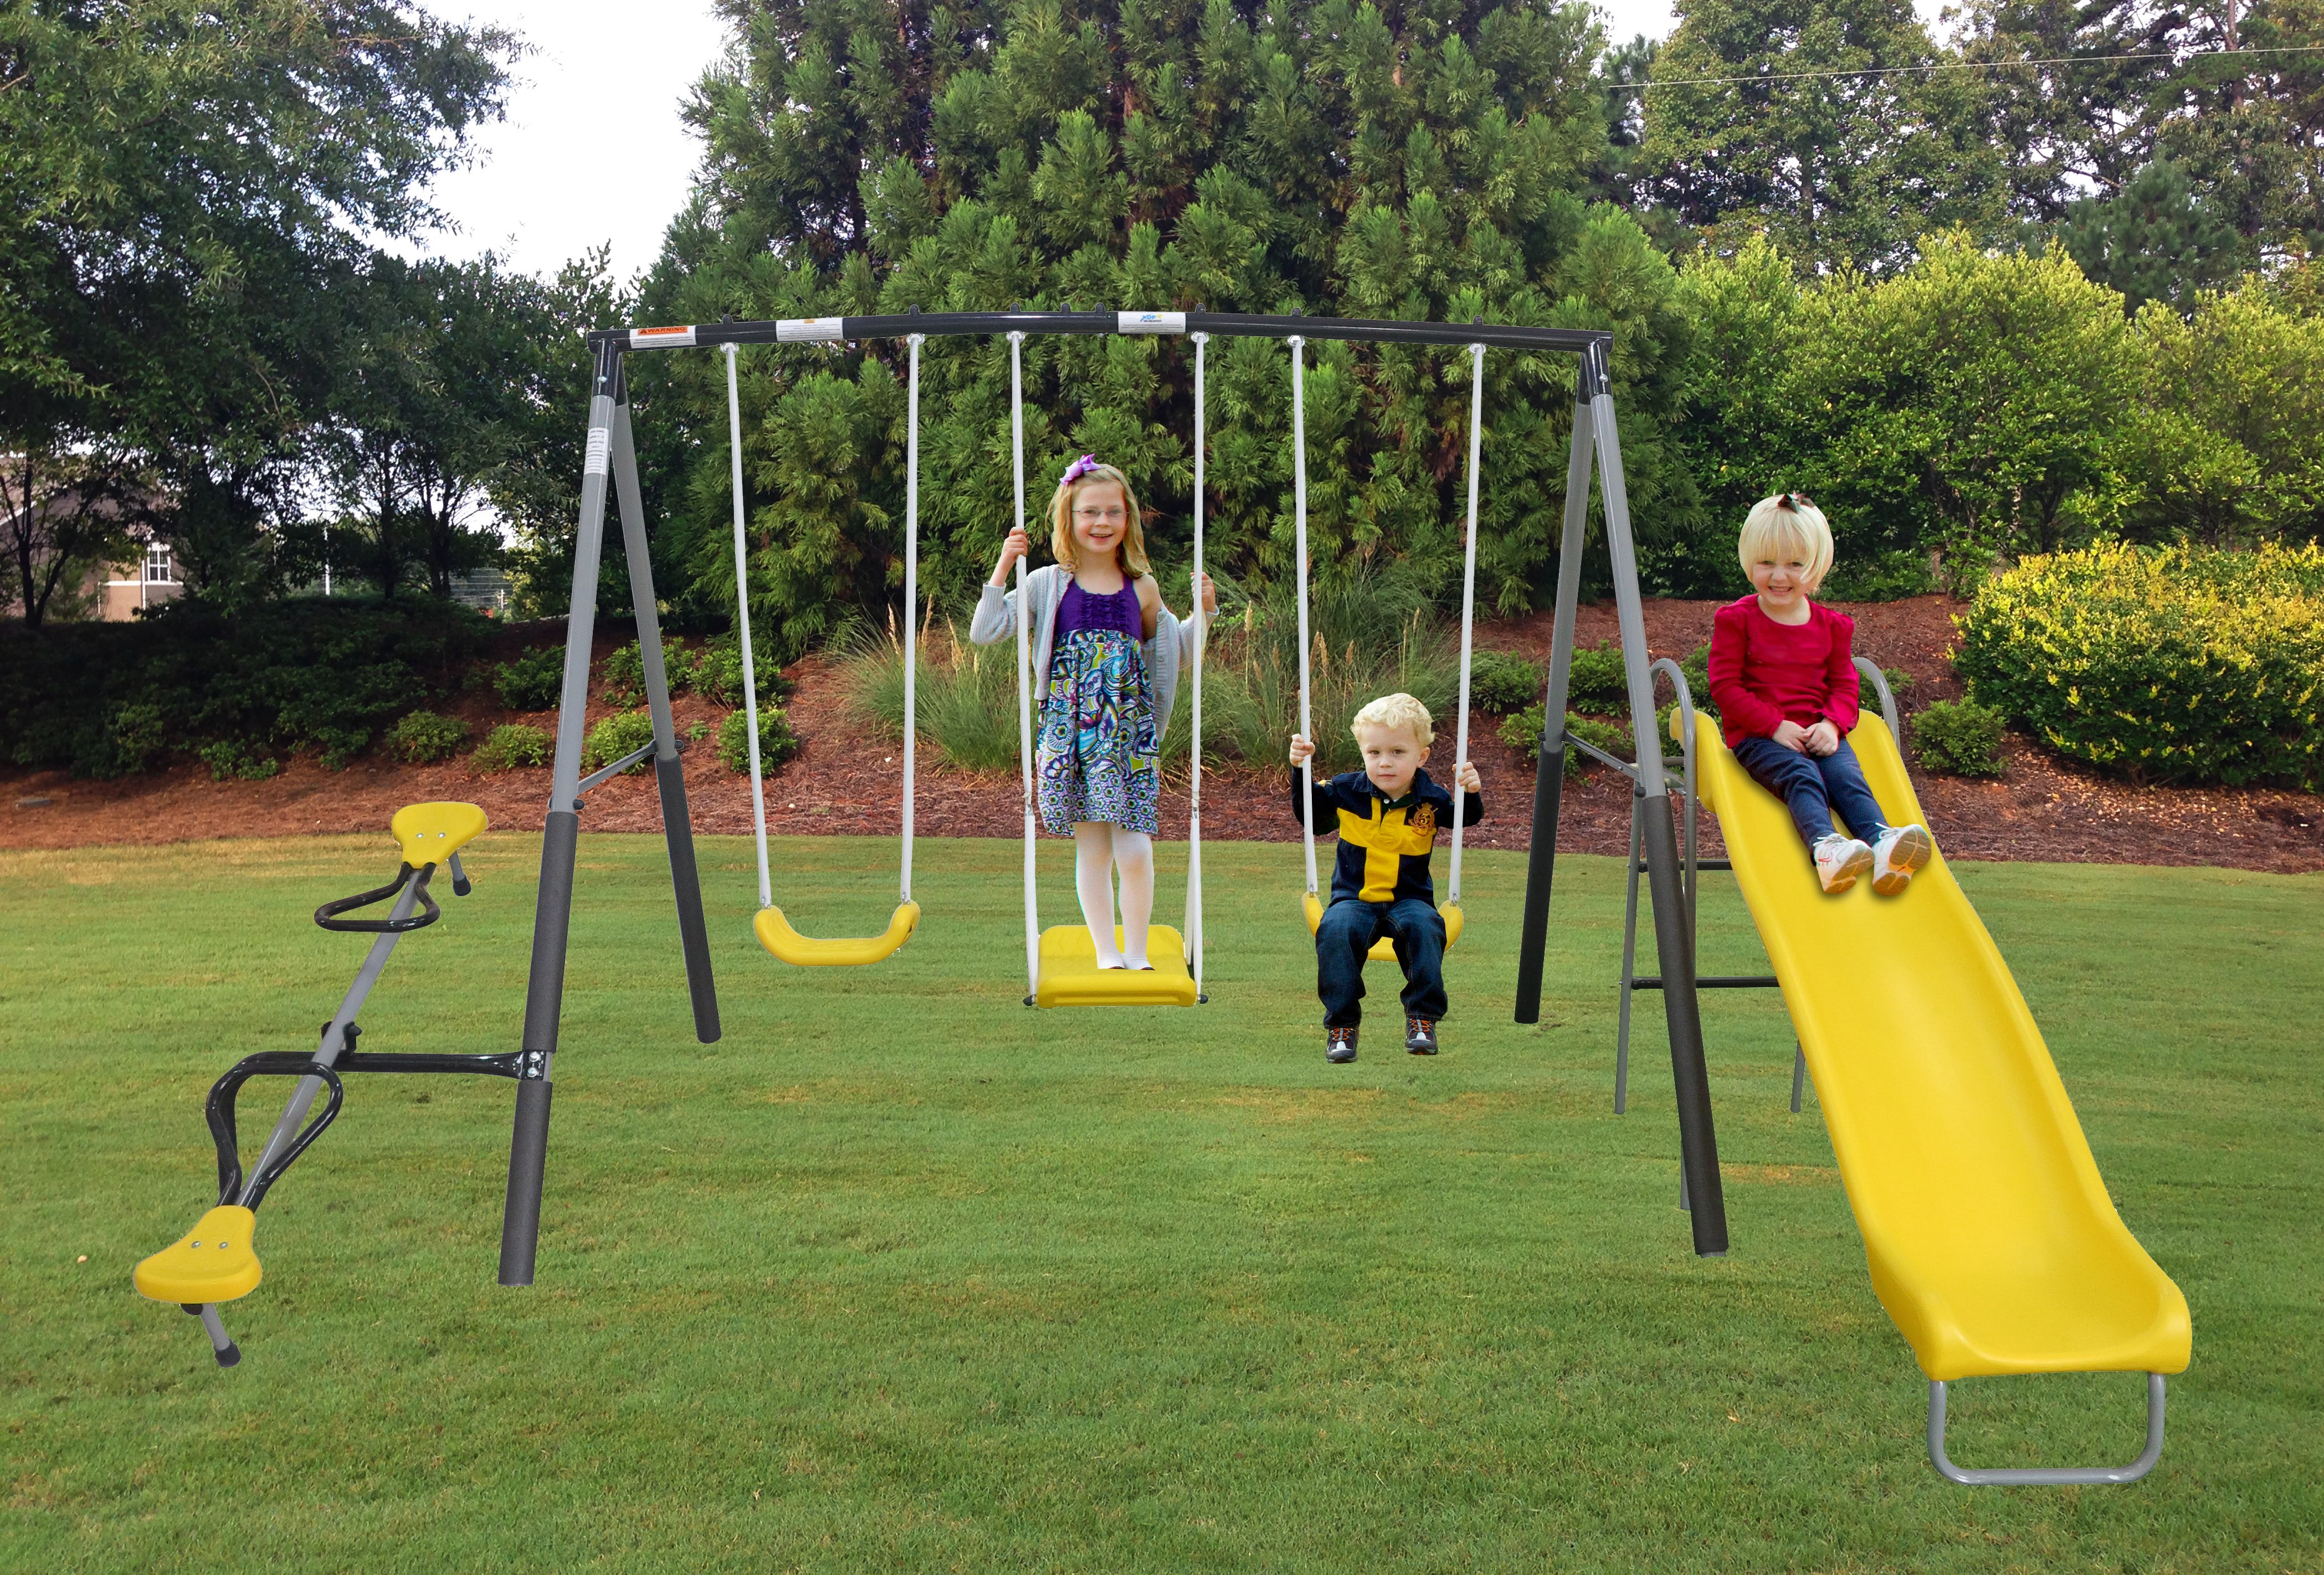 Swing-in Again Metal Swing Set by XDP Recreation with two Swing Seats, See-Saw, and Wave Slide - image 2 of 8